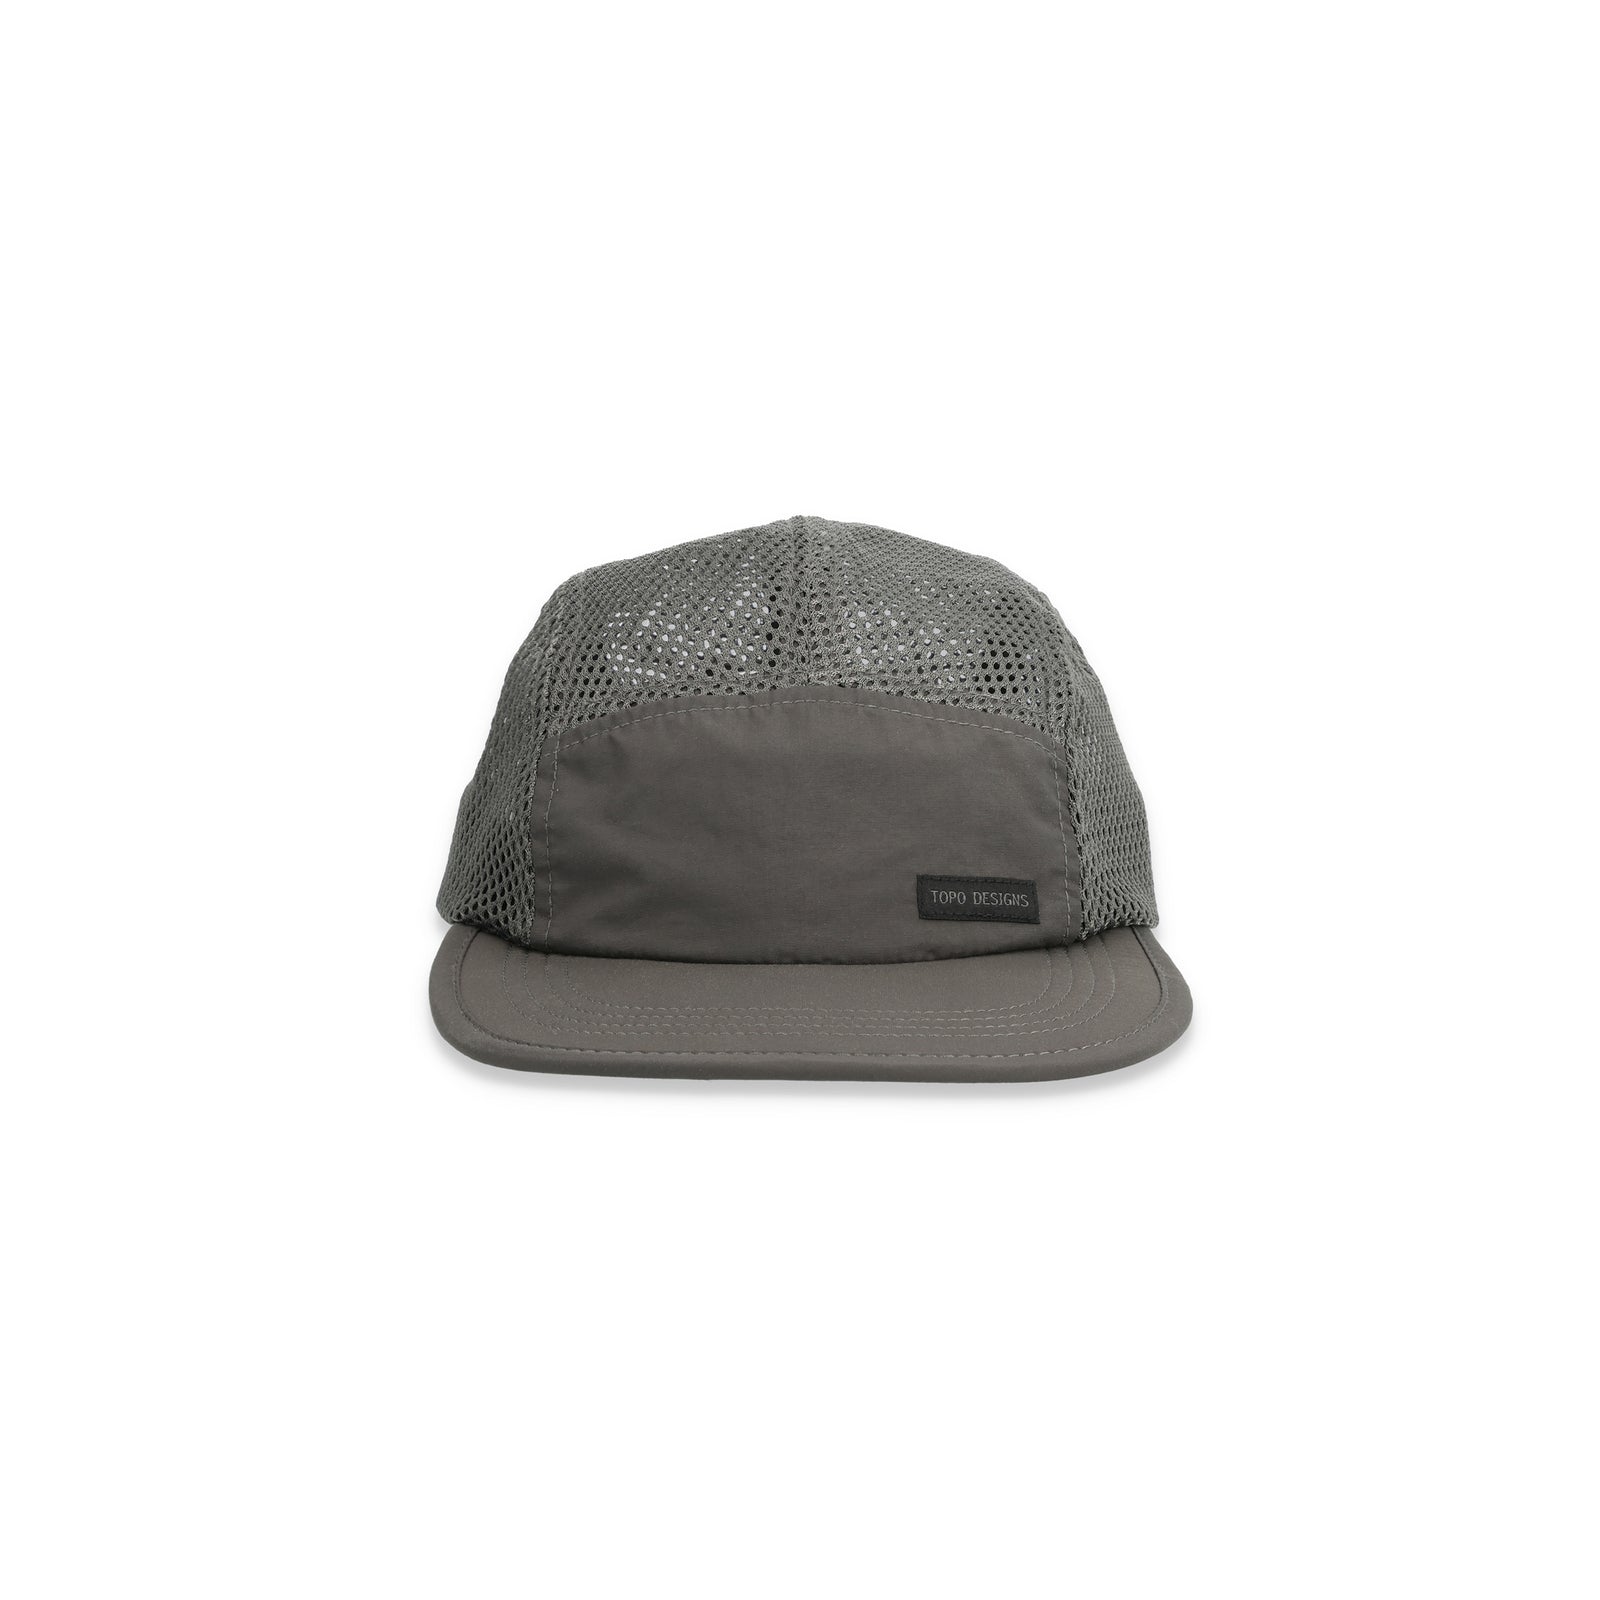 Topo Designs Global mesh back Hat in "Charcoal" gray. Unstructured 5-panel flexible brim packable hat.